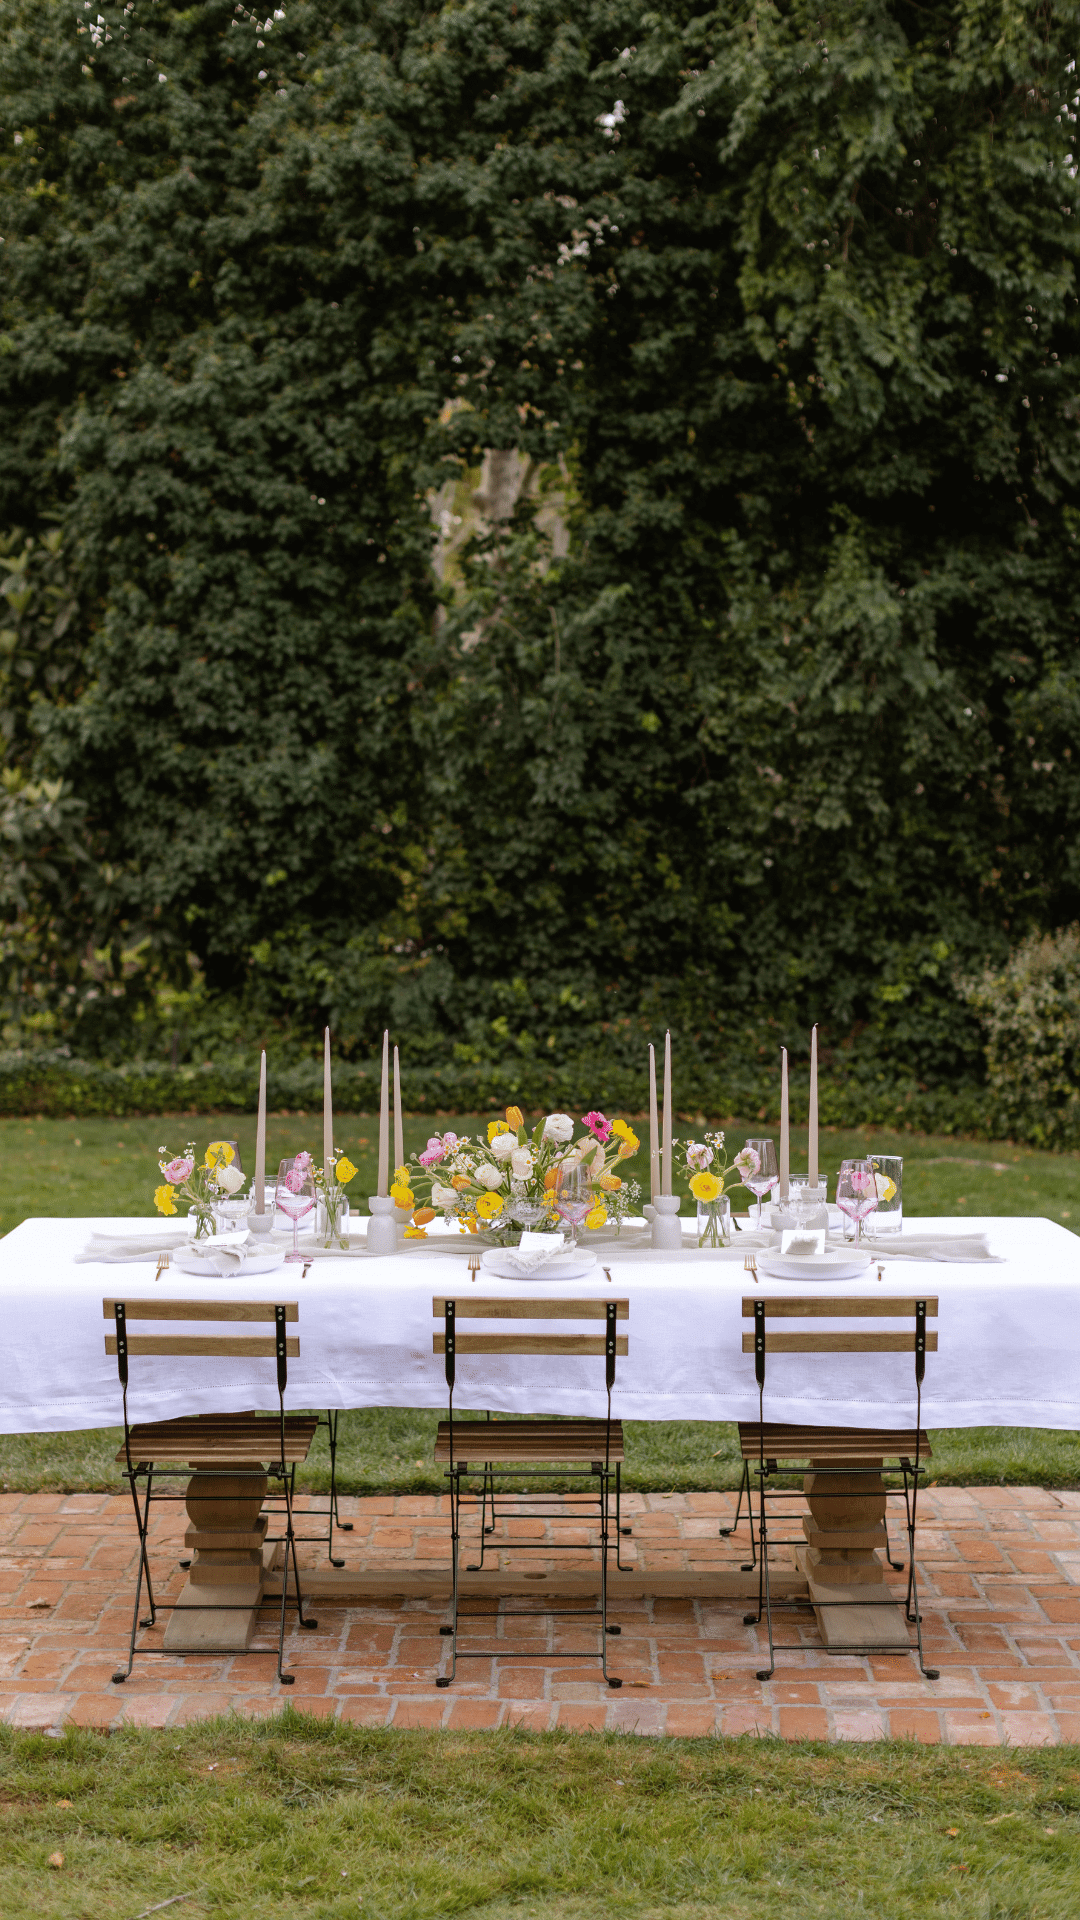 instagram feature of outdoor french chairs and our white linen table runner and napkins set and candlesticks